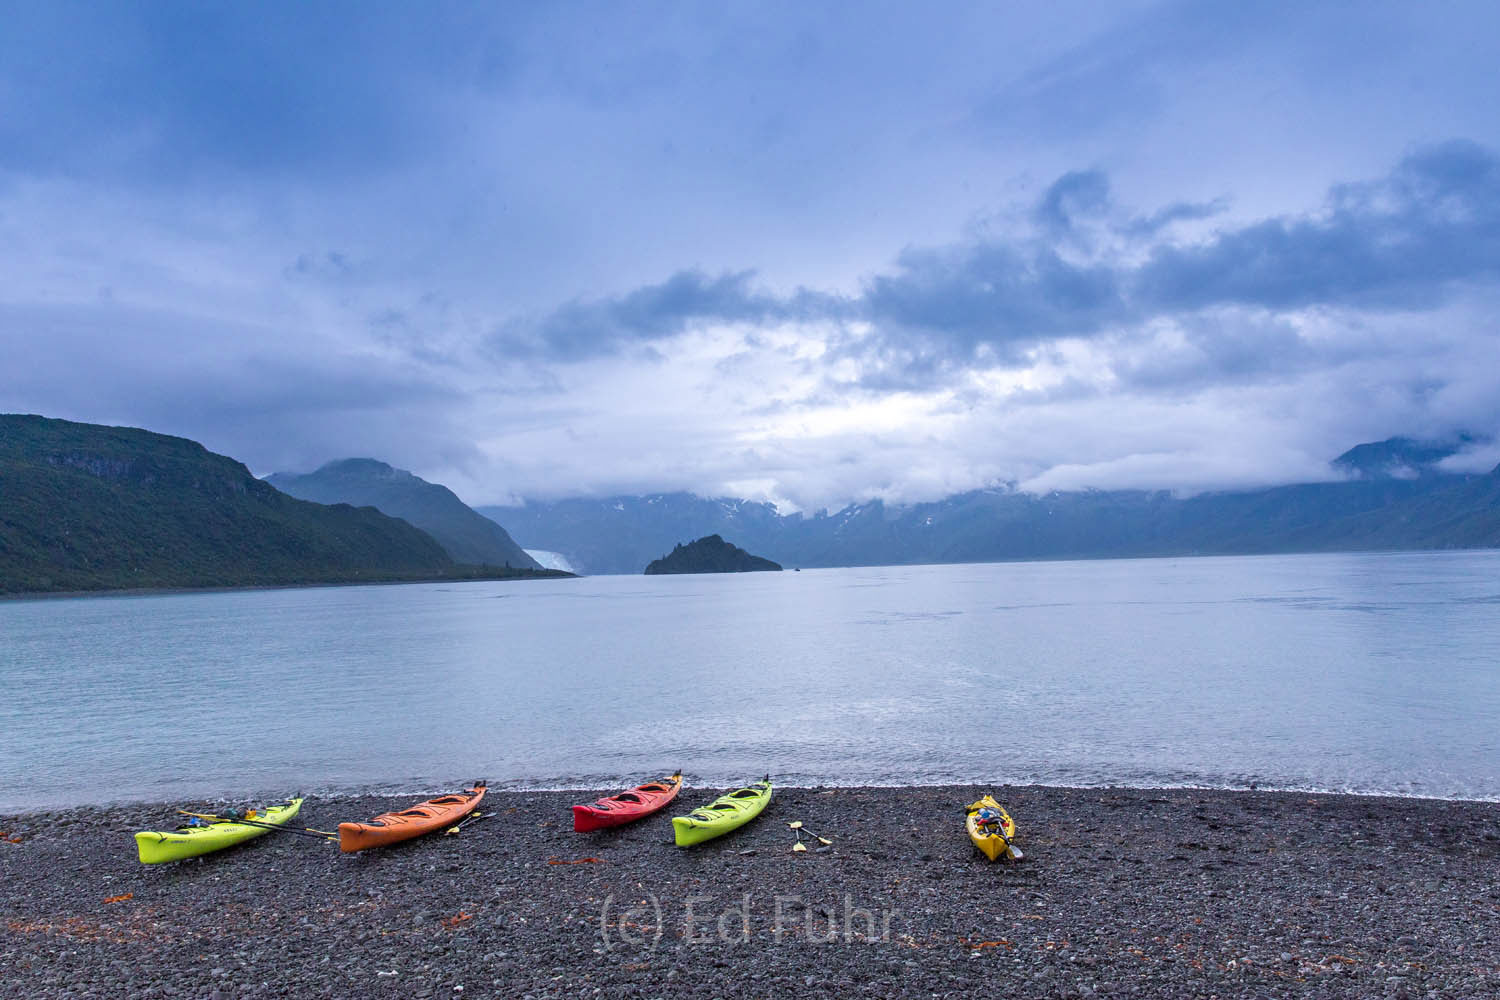 The kayaks are lined up and ready for the several mile journey across Aialik Bay.